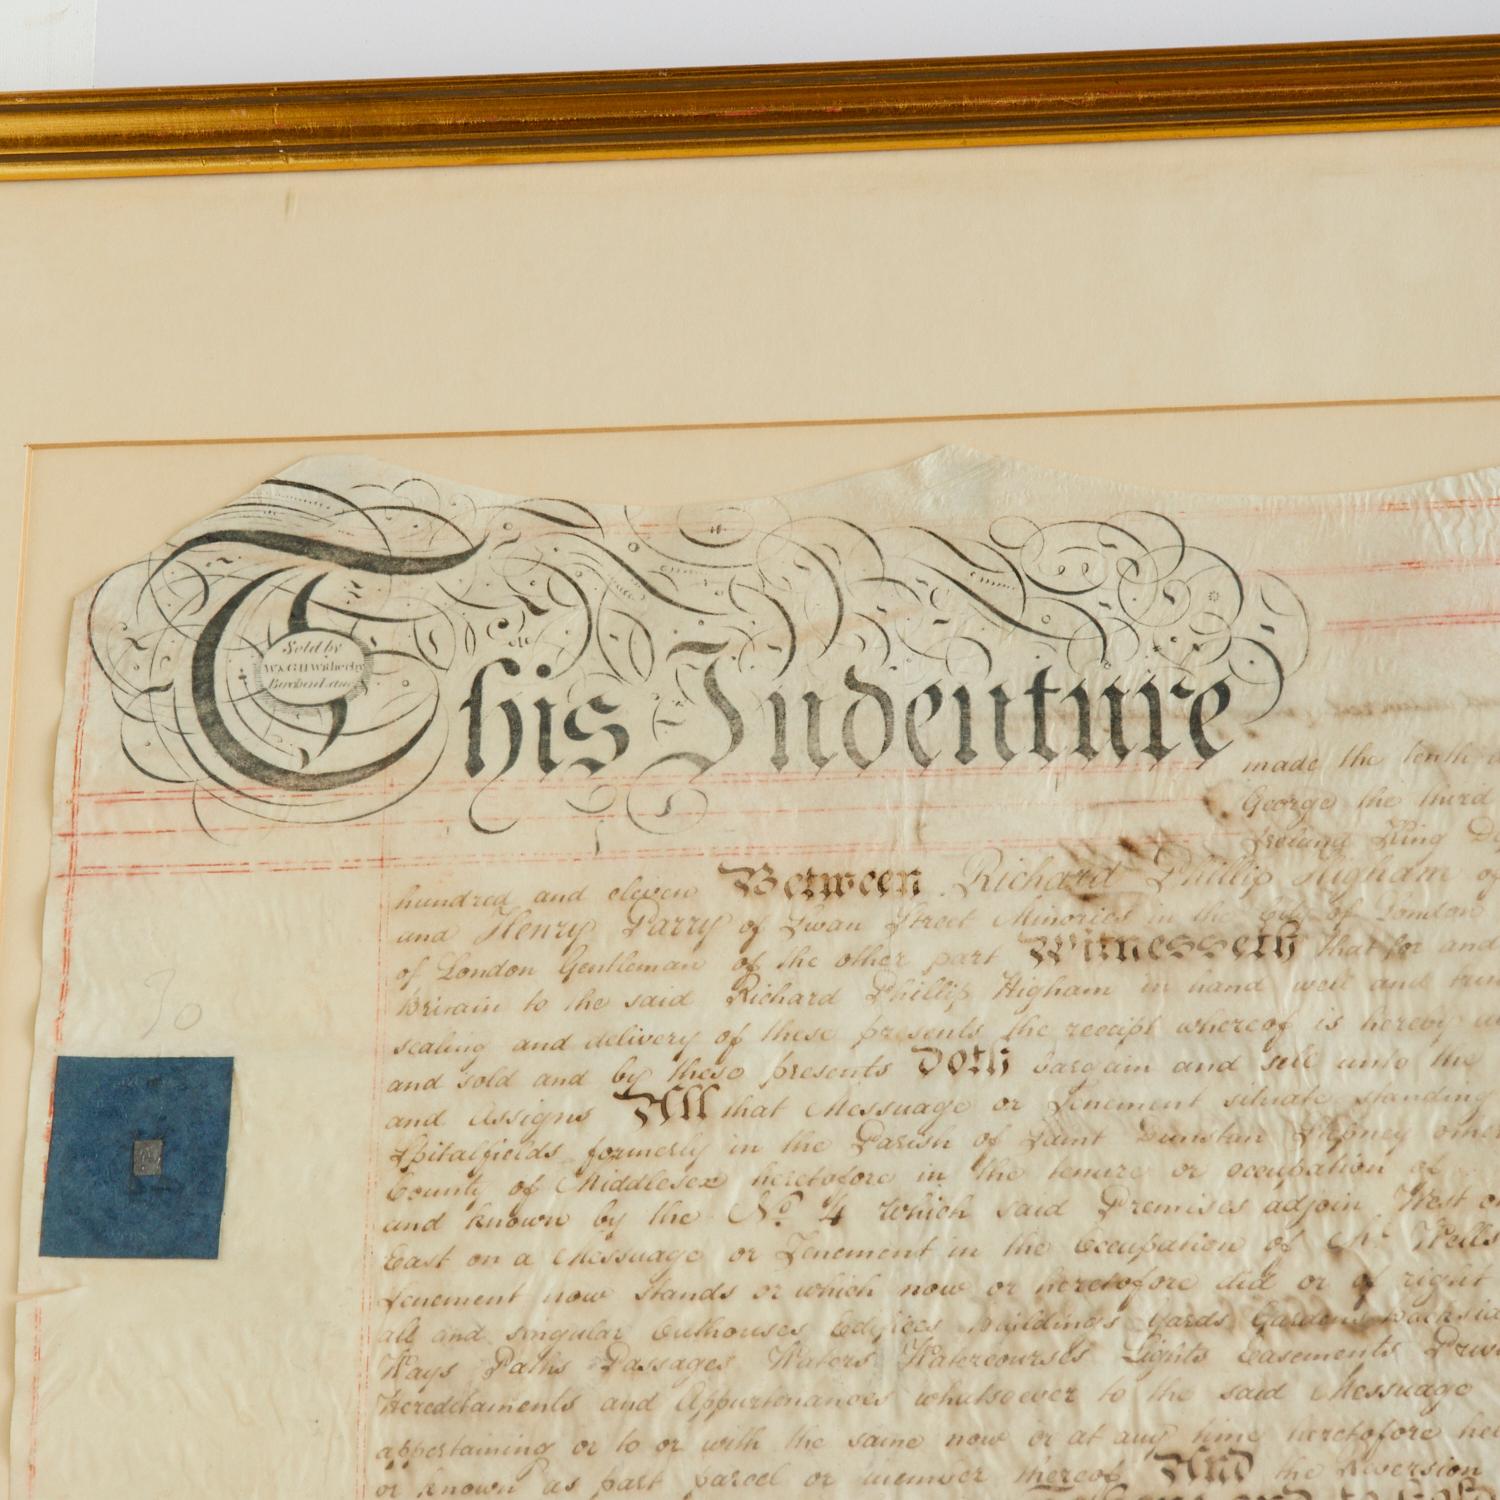 Vellum land indenture, 1811, London. Parties mentioned include Richard Phillip Higham, Henry Parry, and John Alliston.

The document contains two seals. The blue seal is likely a scrivener's seal. Scriveners were granted authority to draft